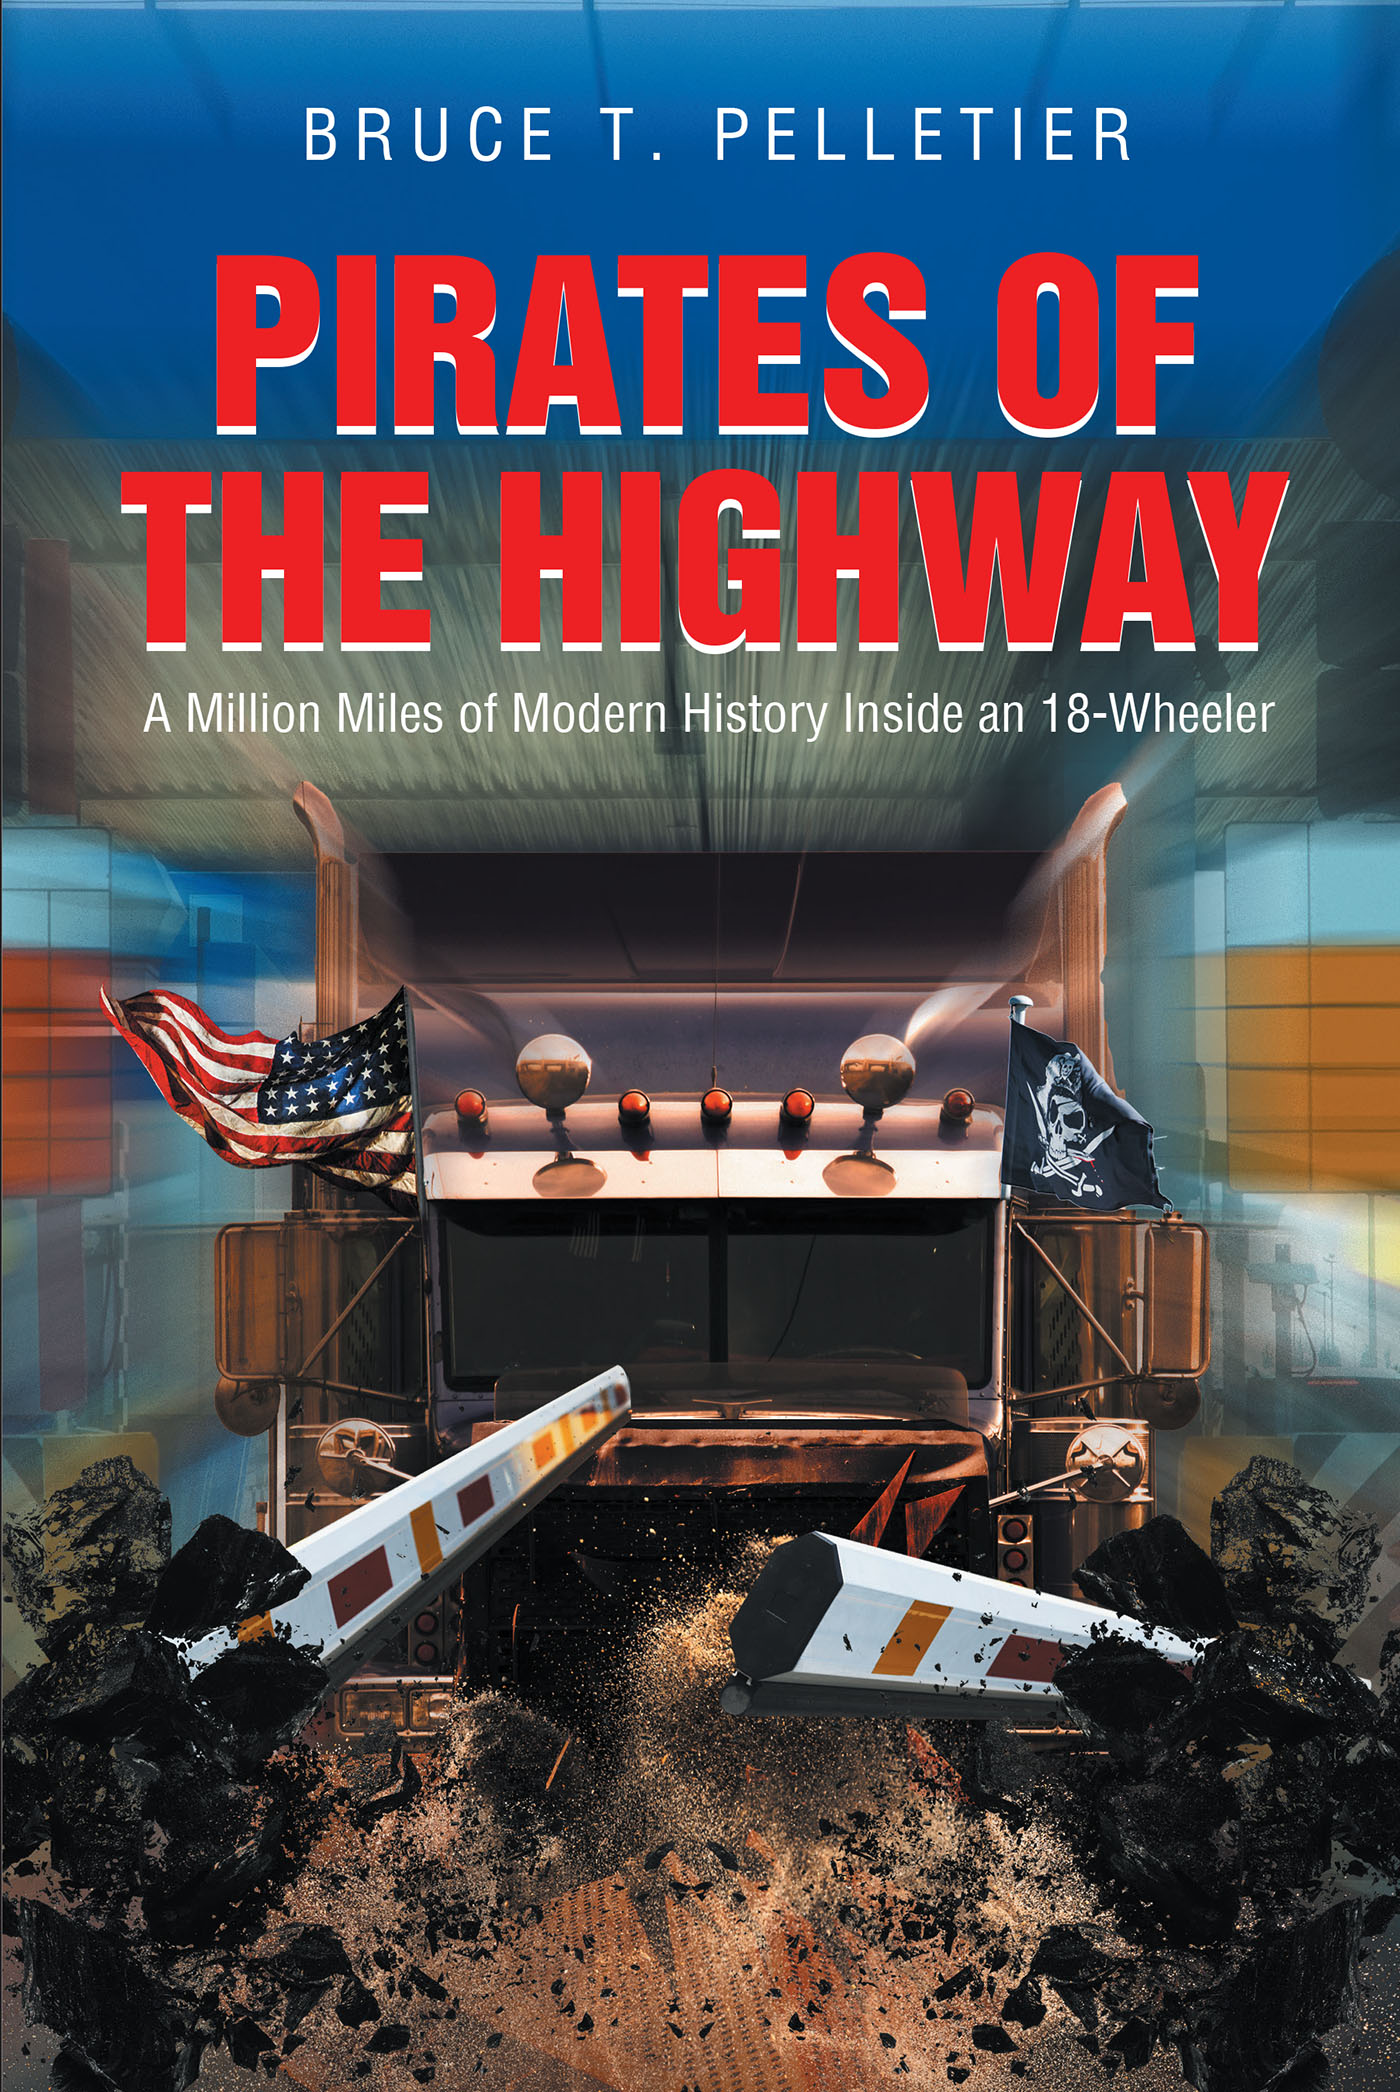 Author Bruce T. Pelletier’s New Book, “Pirates of the Highway: A Million Miles of Modern History Inside an 18-Wheeler” Offers Entertainment and History Lessons